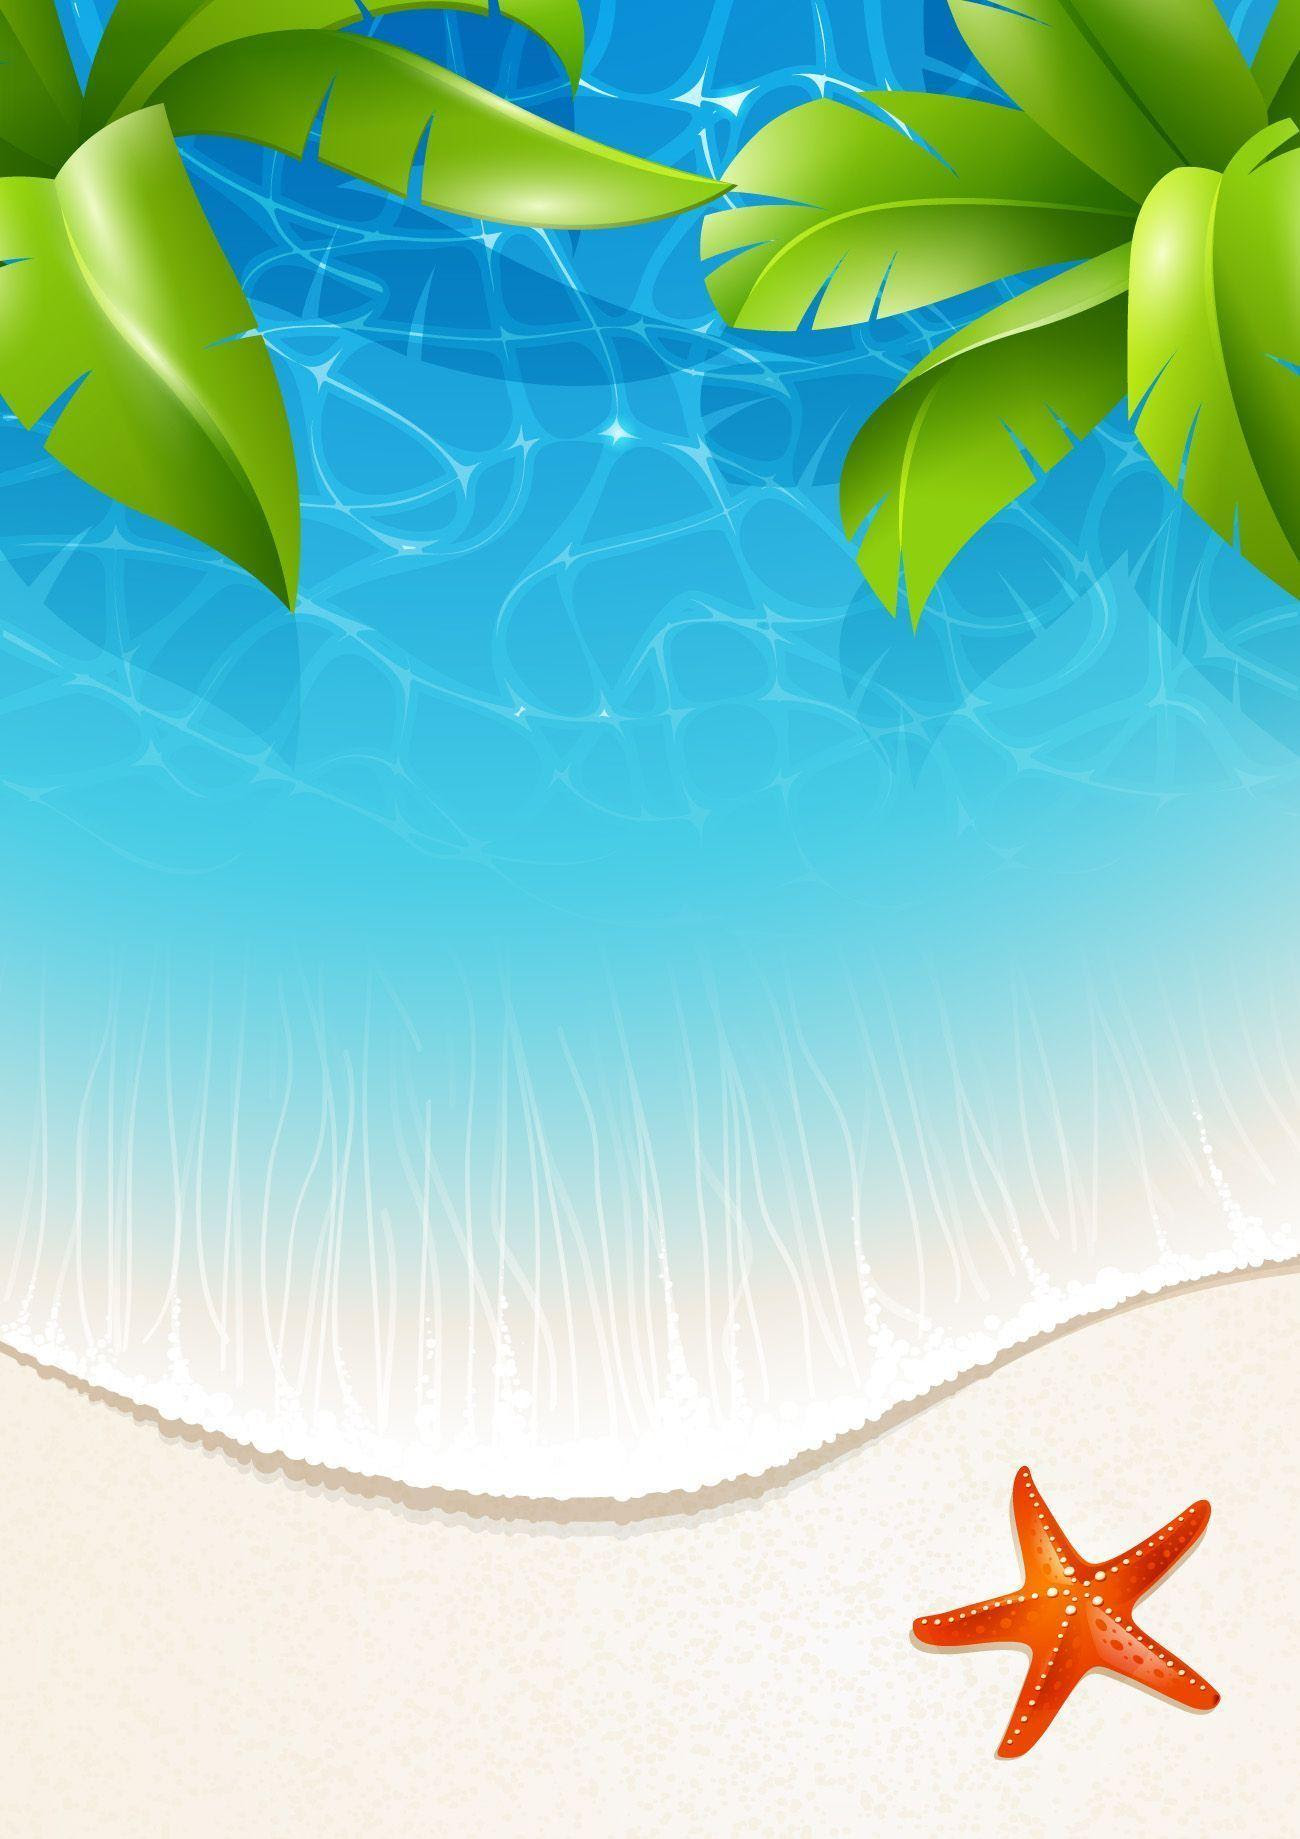 Tropical Backgrounds Image - Wallpaper Cave